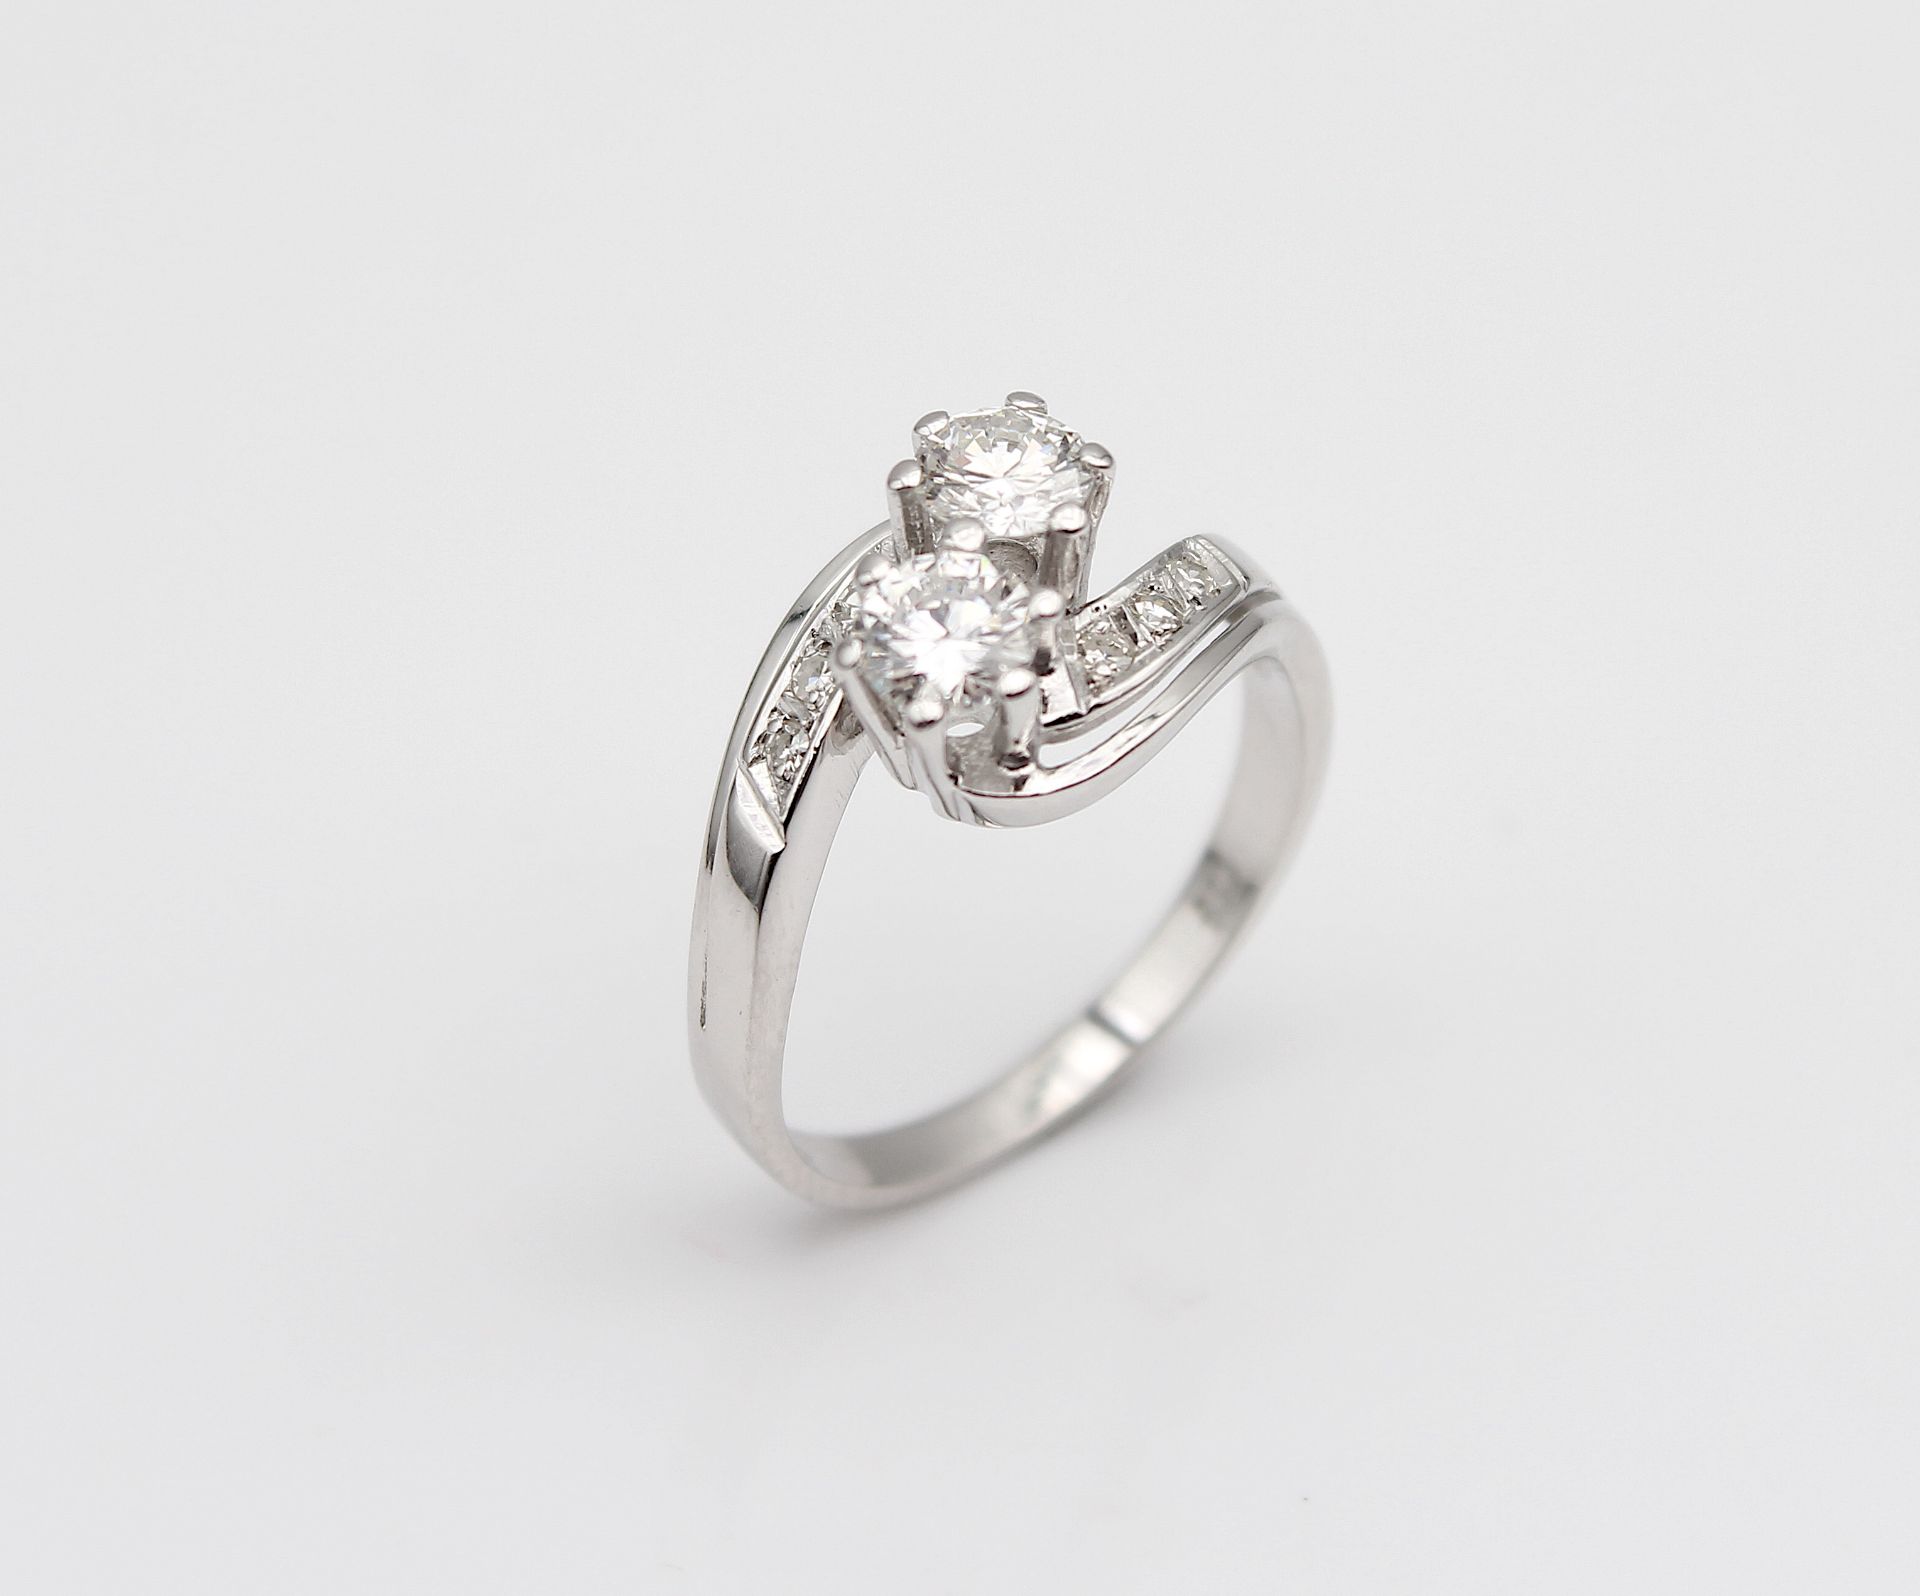 High quality ring with brilliants and diamonds